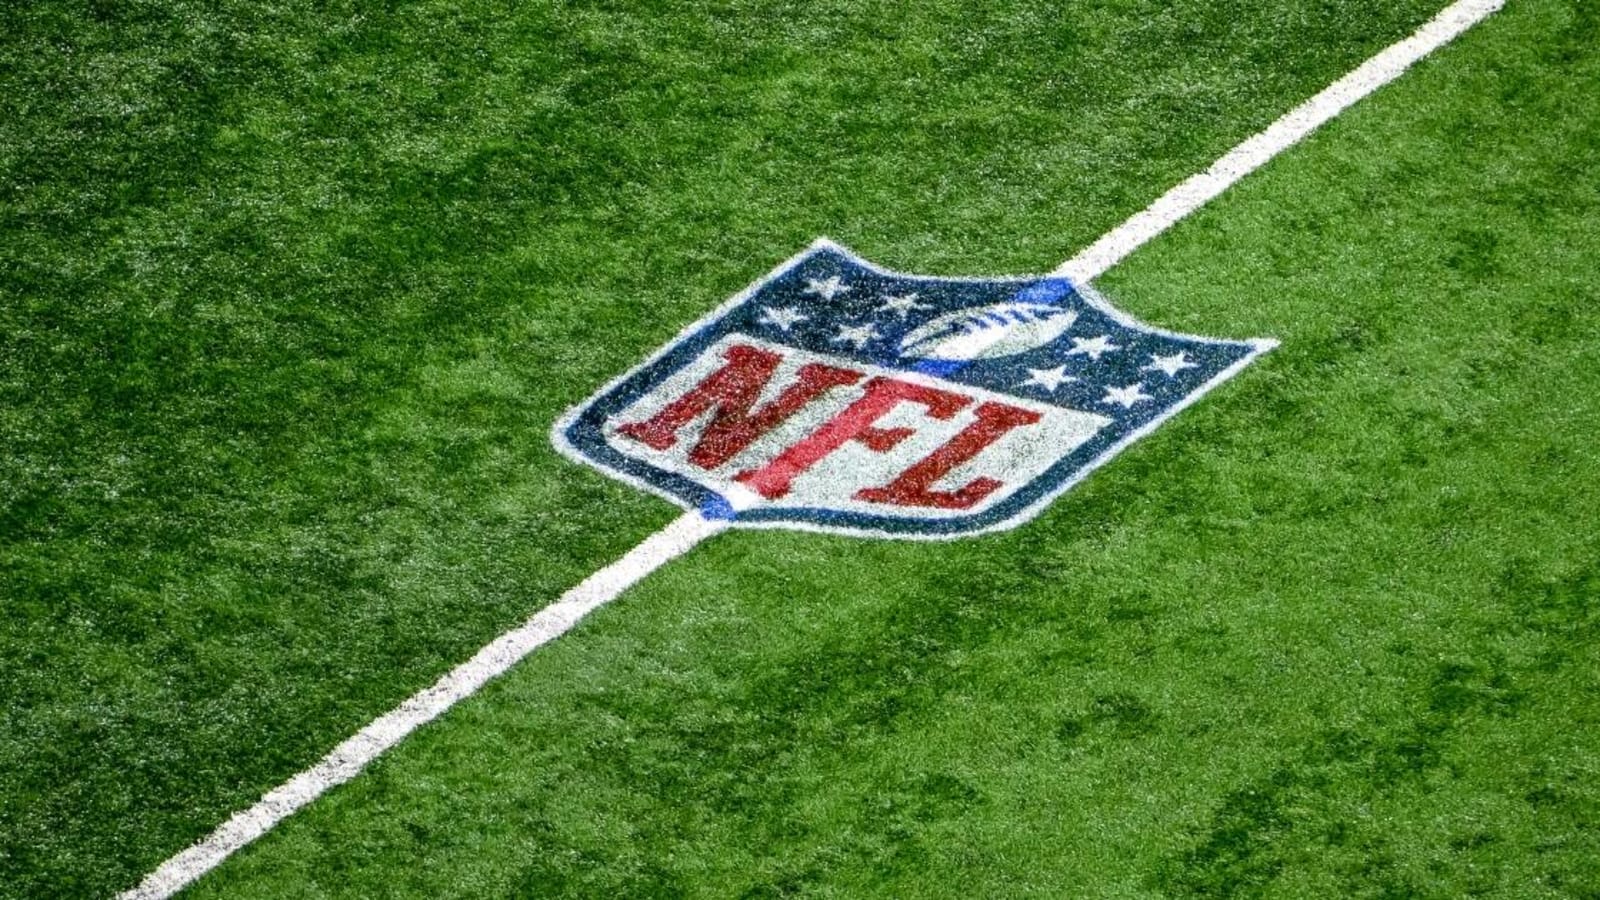 NFL announces 20 suspensions beginning following roster cuts